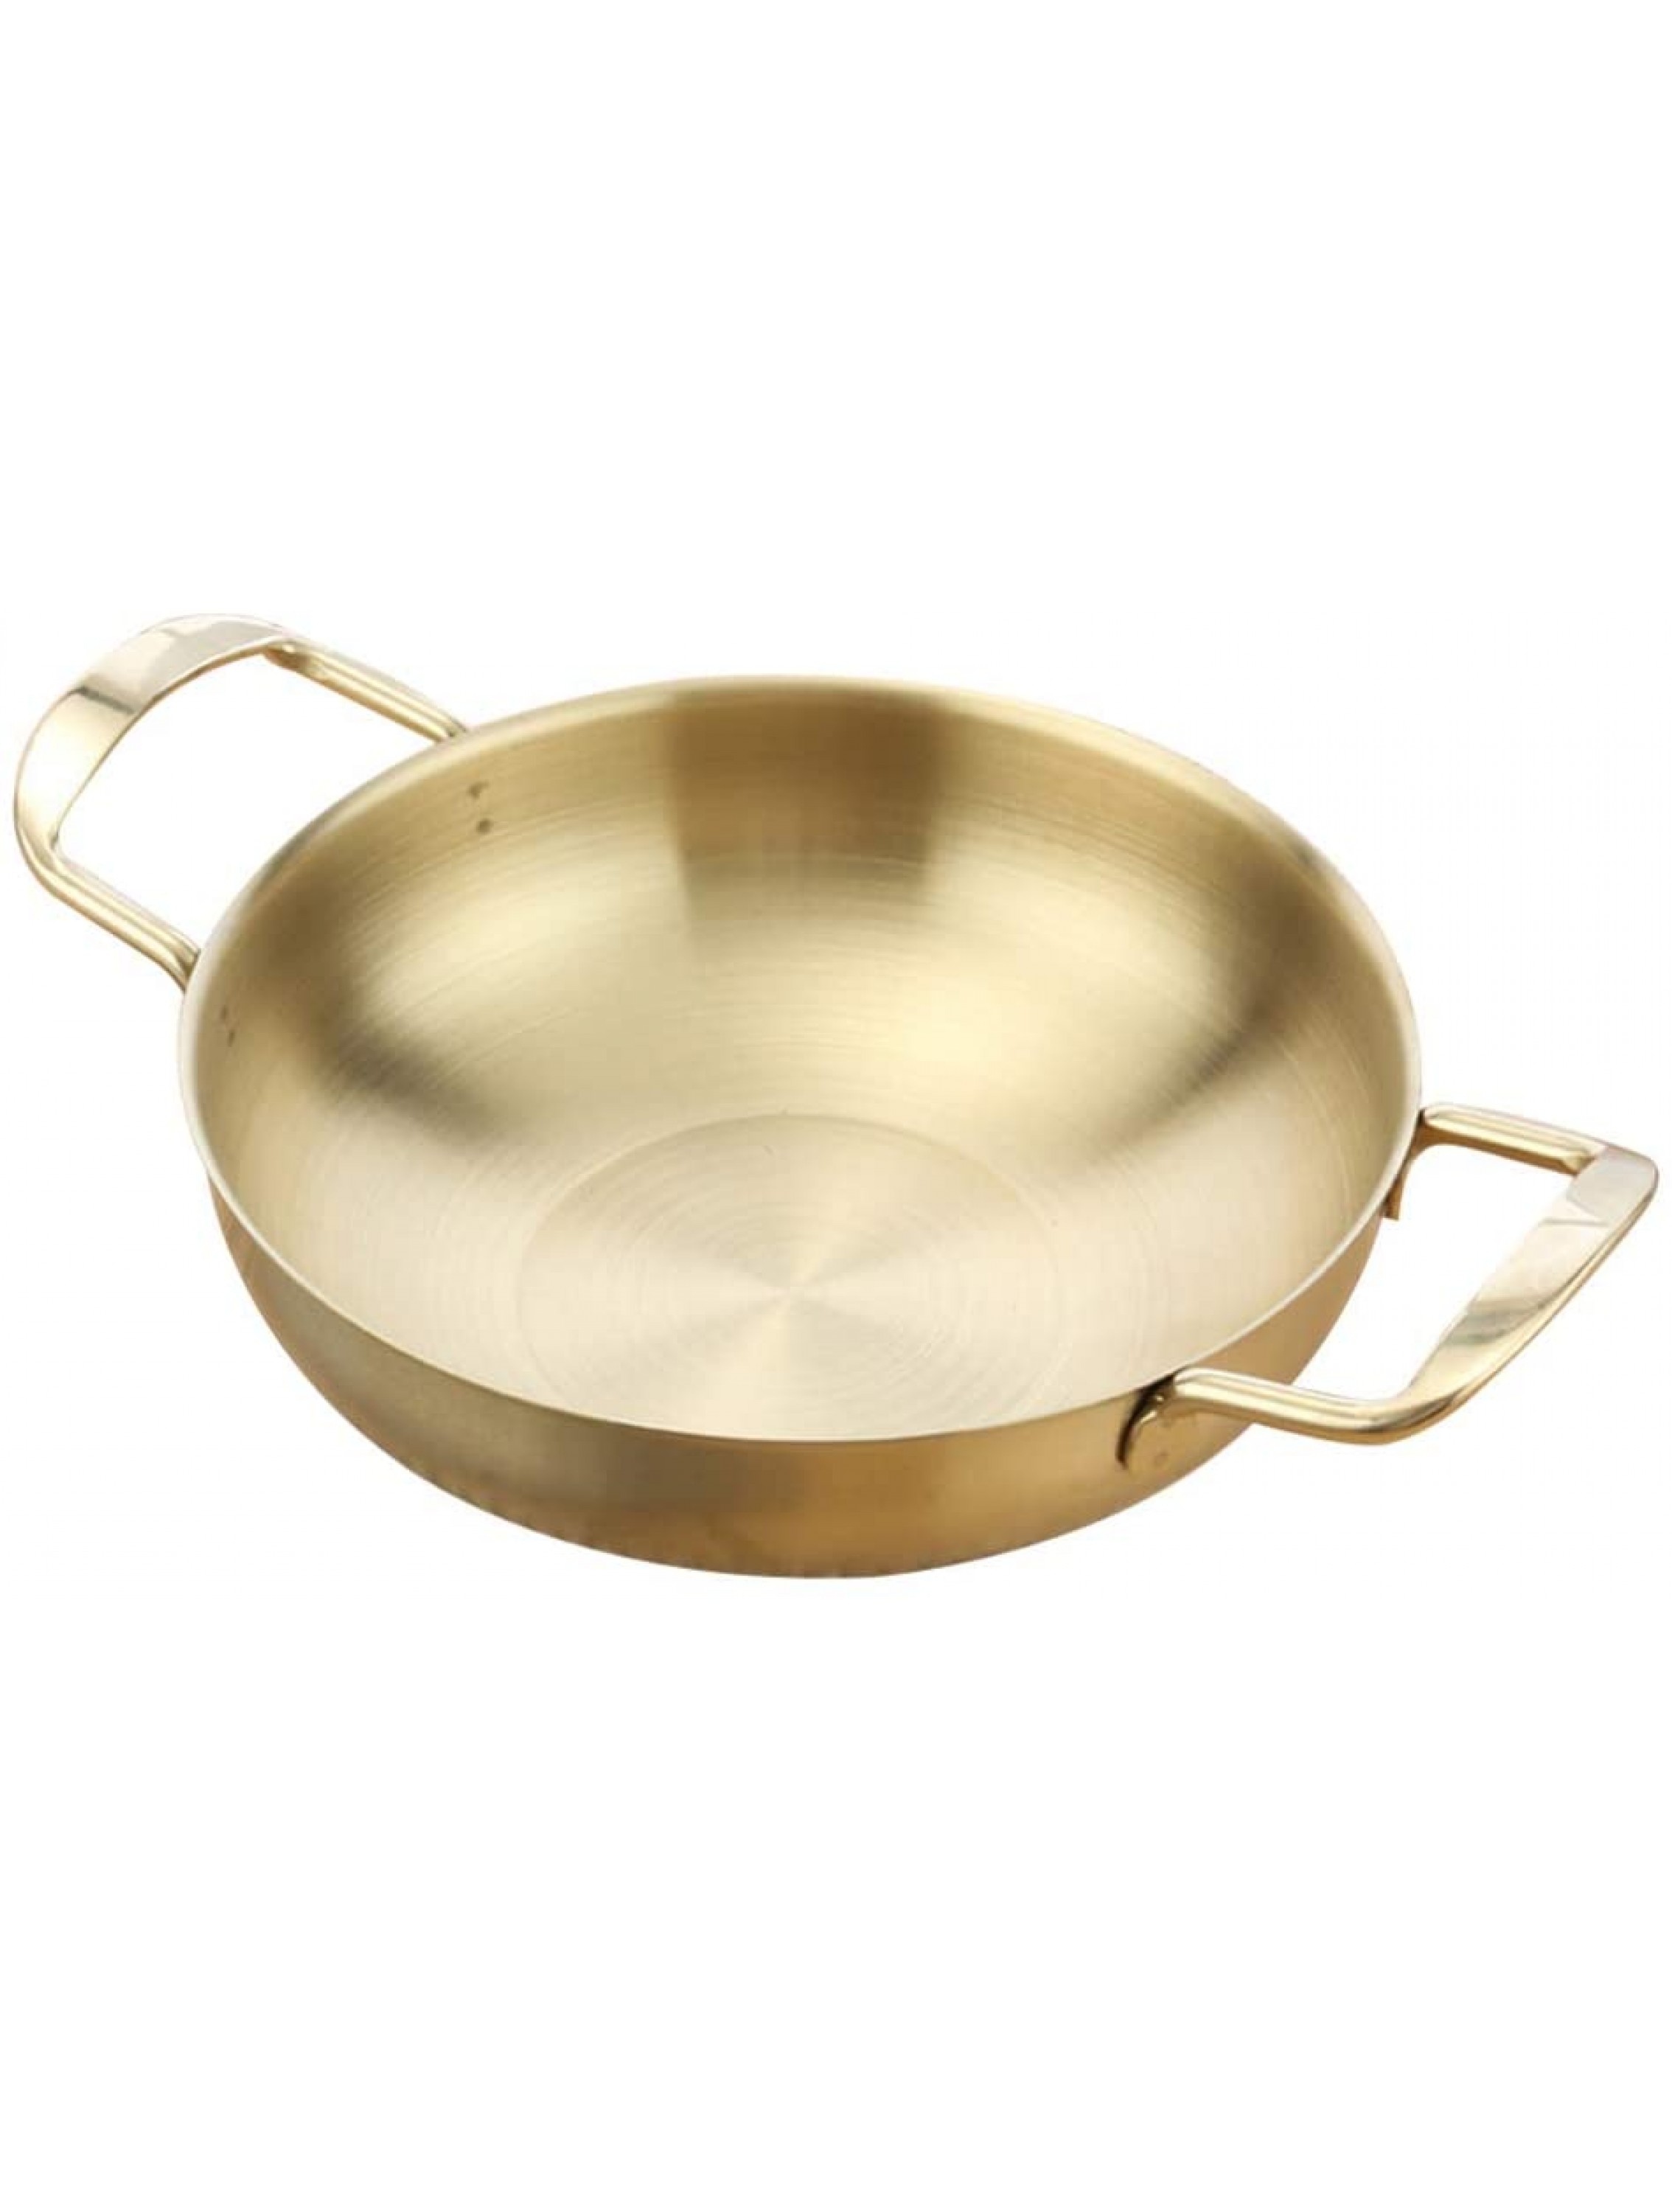 YARNOW Everyday Pan Cookware Mini Chefs Classic Stainless Steel Everyday Pan Cookware Inner Diameter 20cm 1PCS Golden - BC8ND80M0